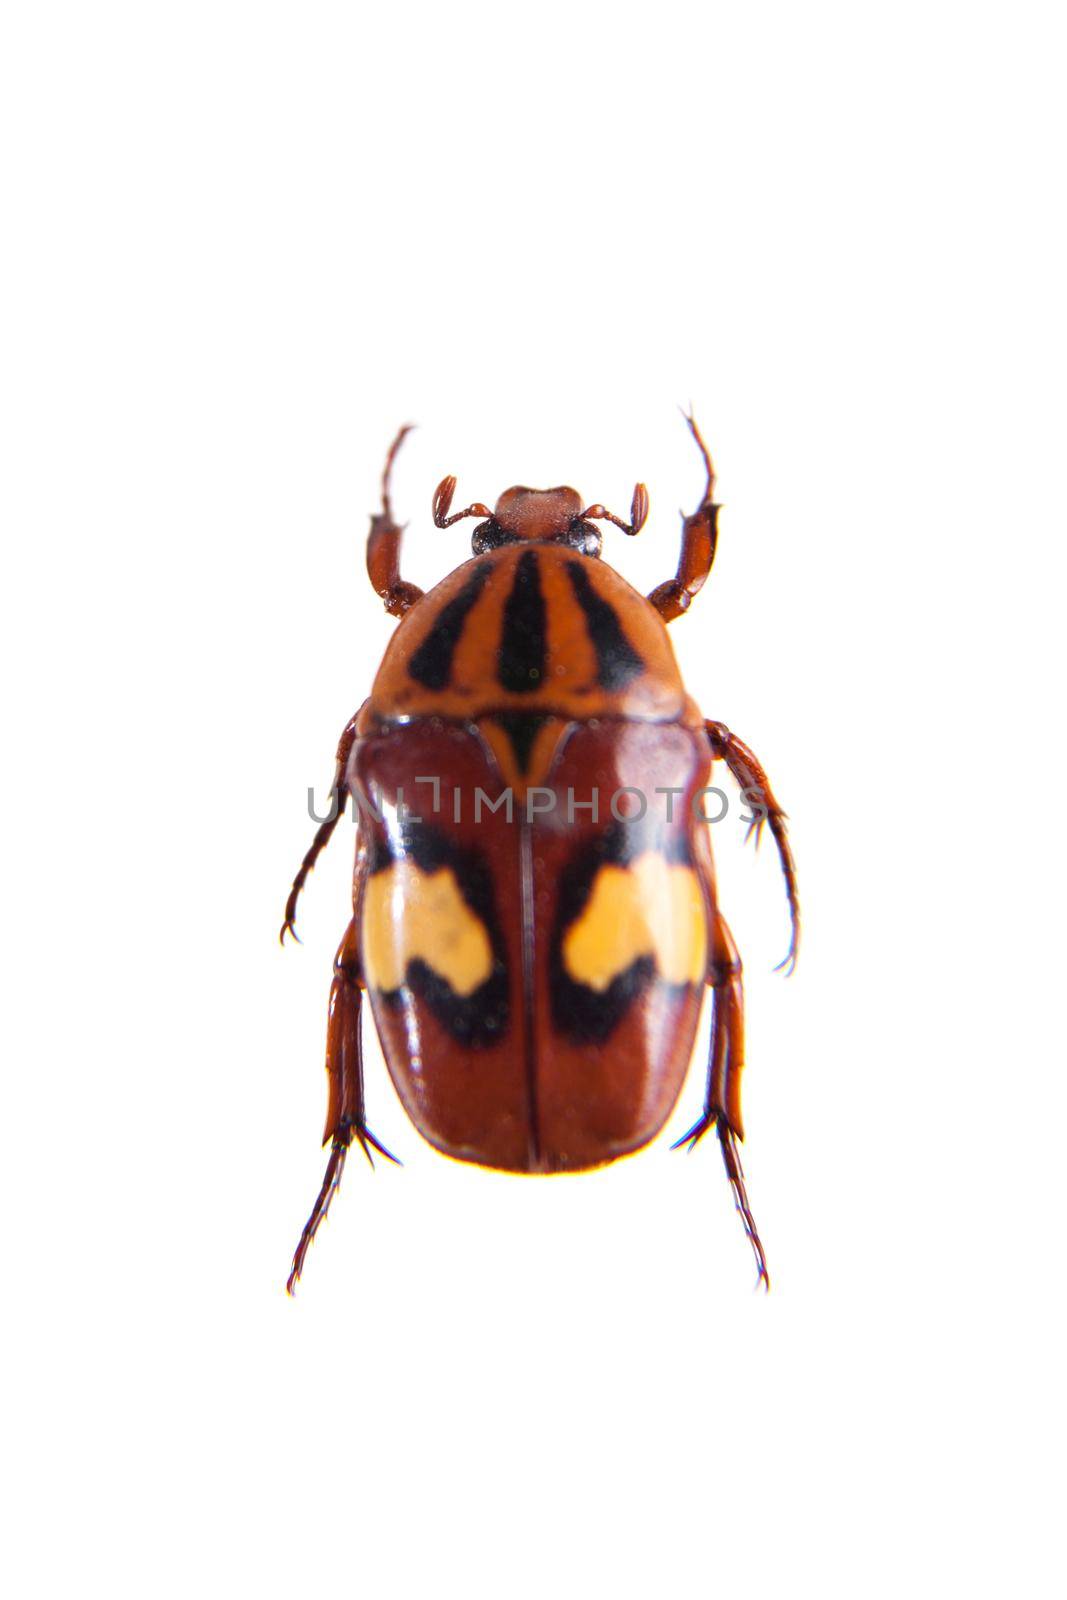 Flower beetle in museum isolated on the white background